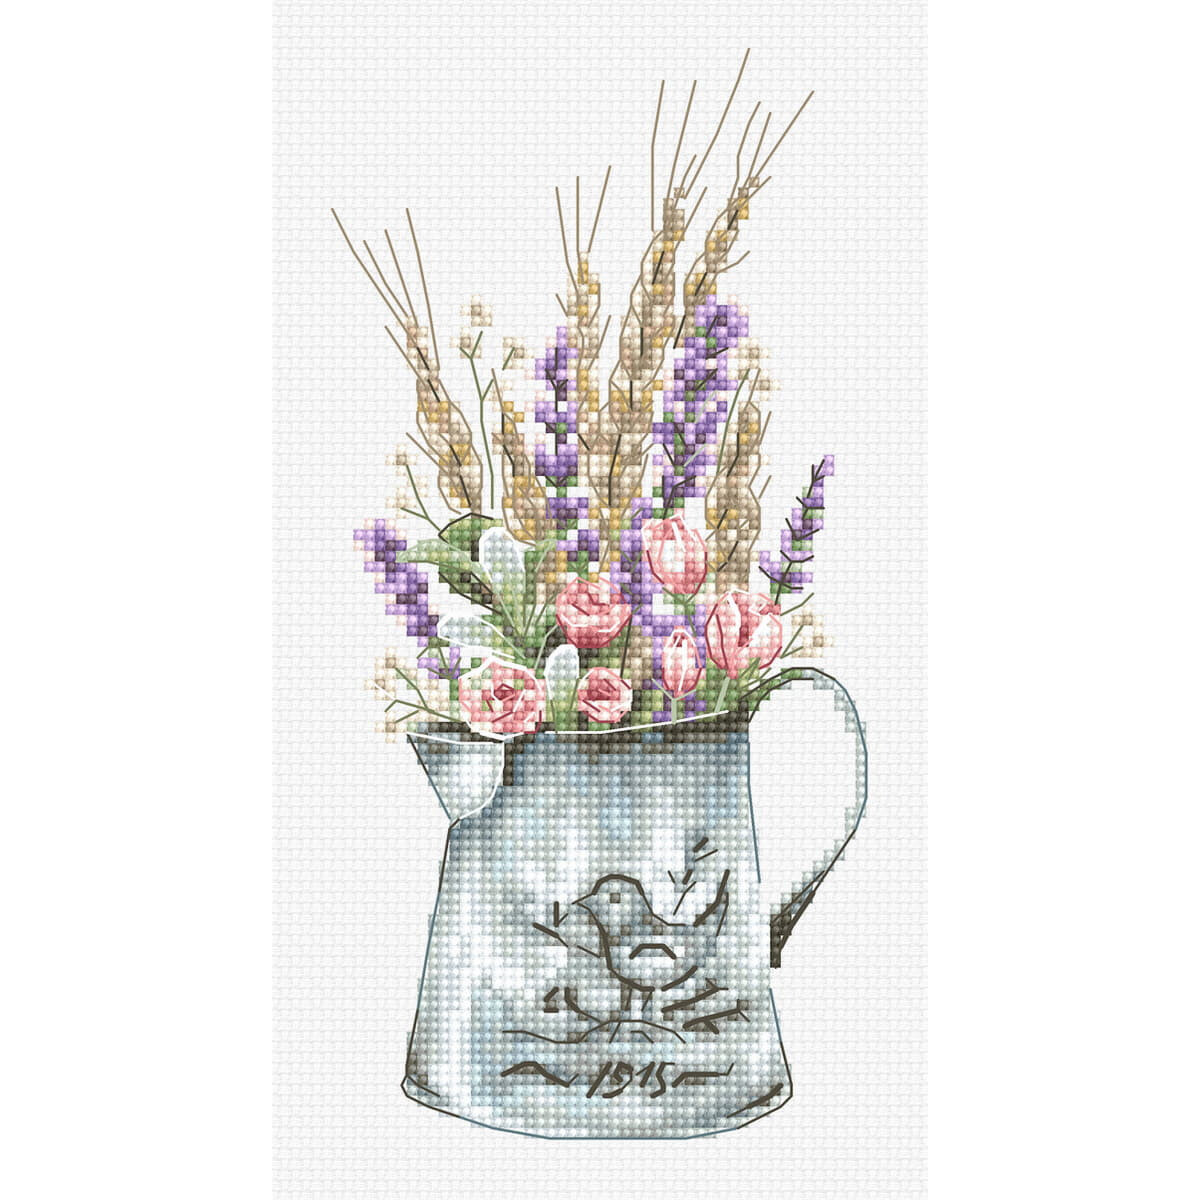 A cross stitch image of a rustic metal jug decorated with...